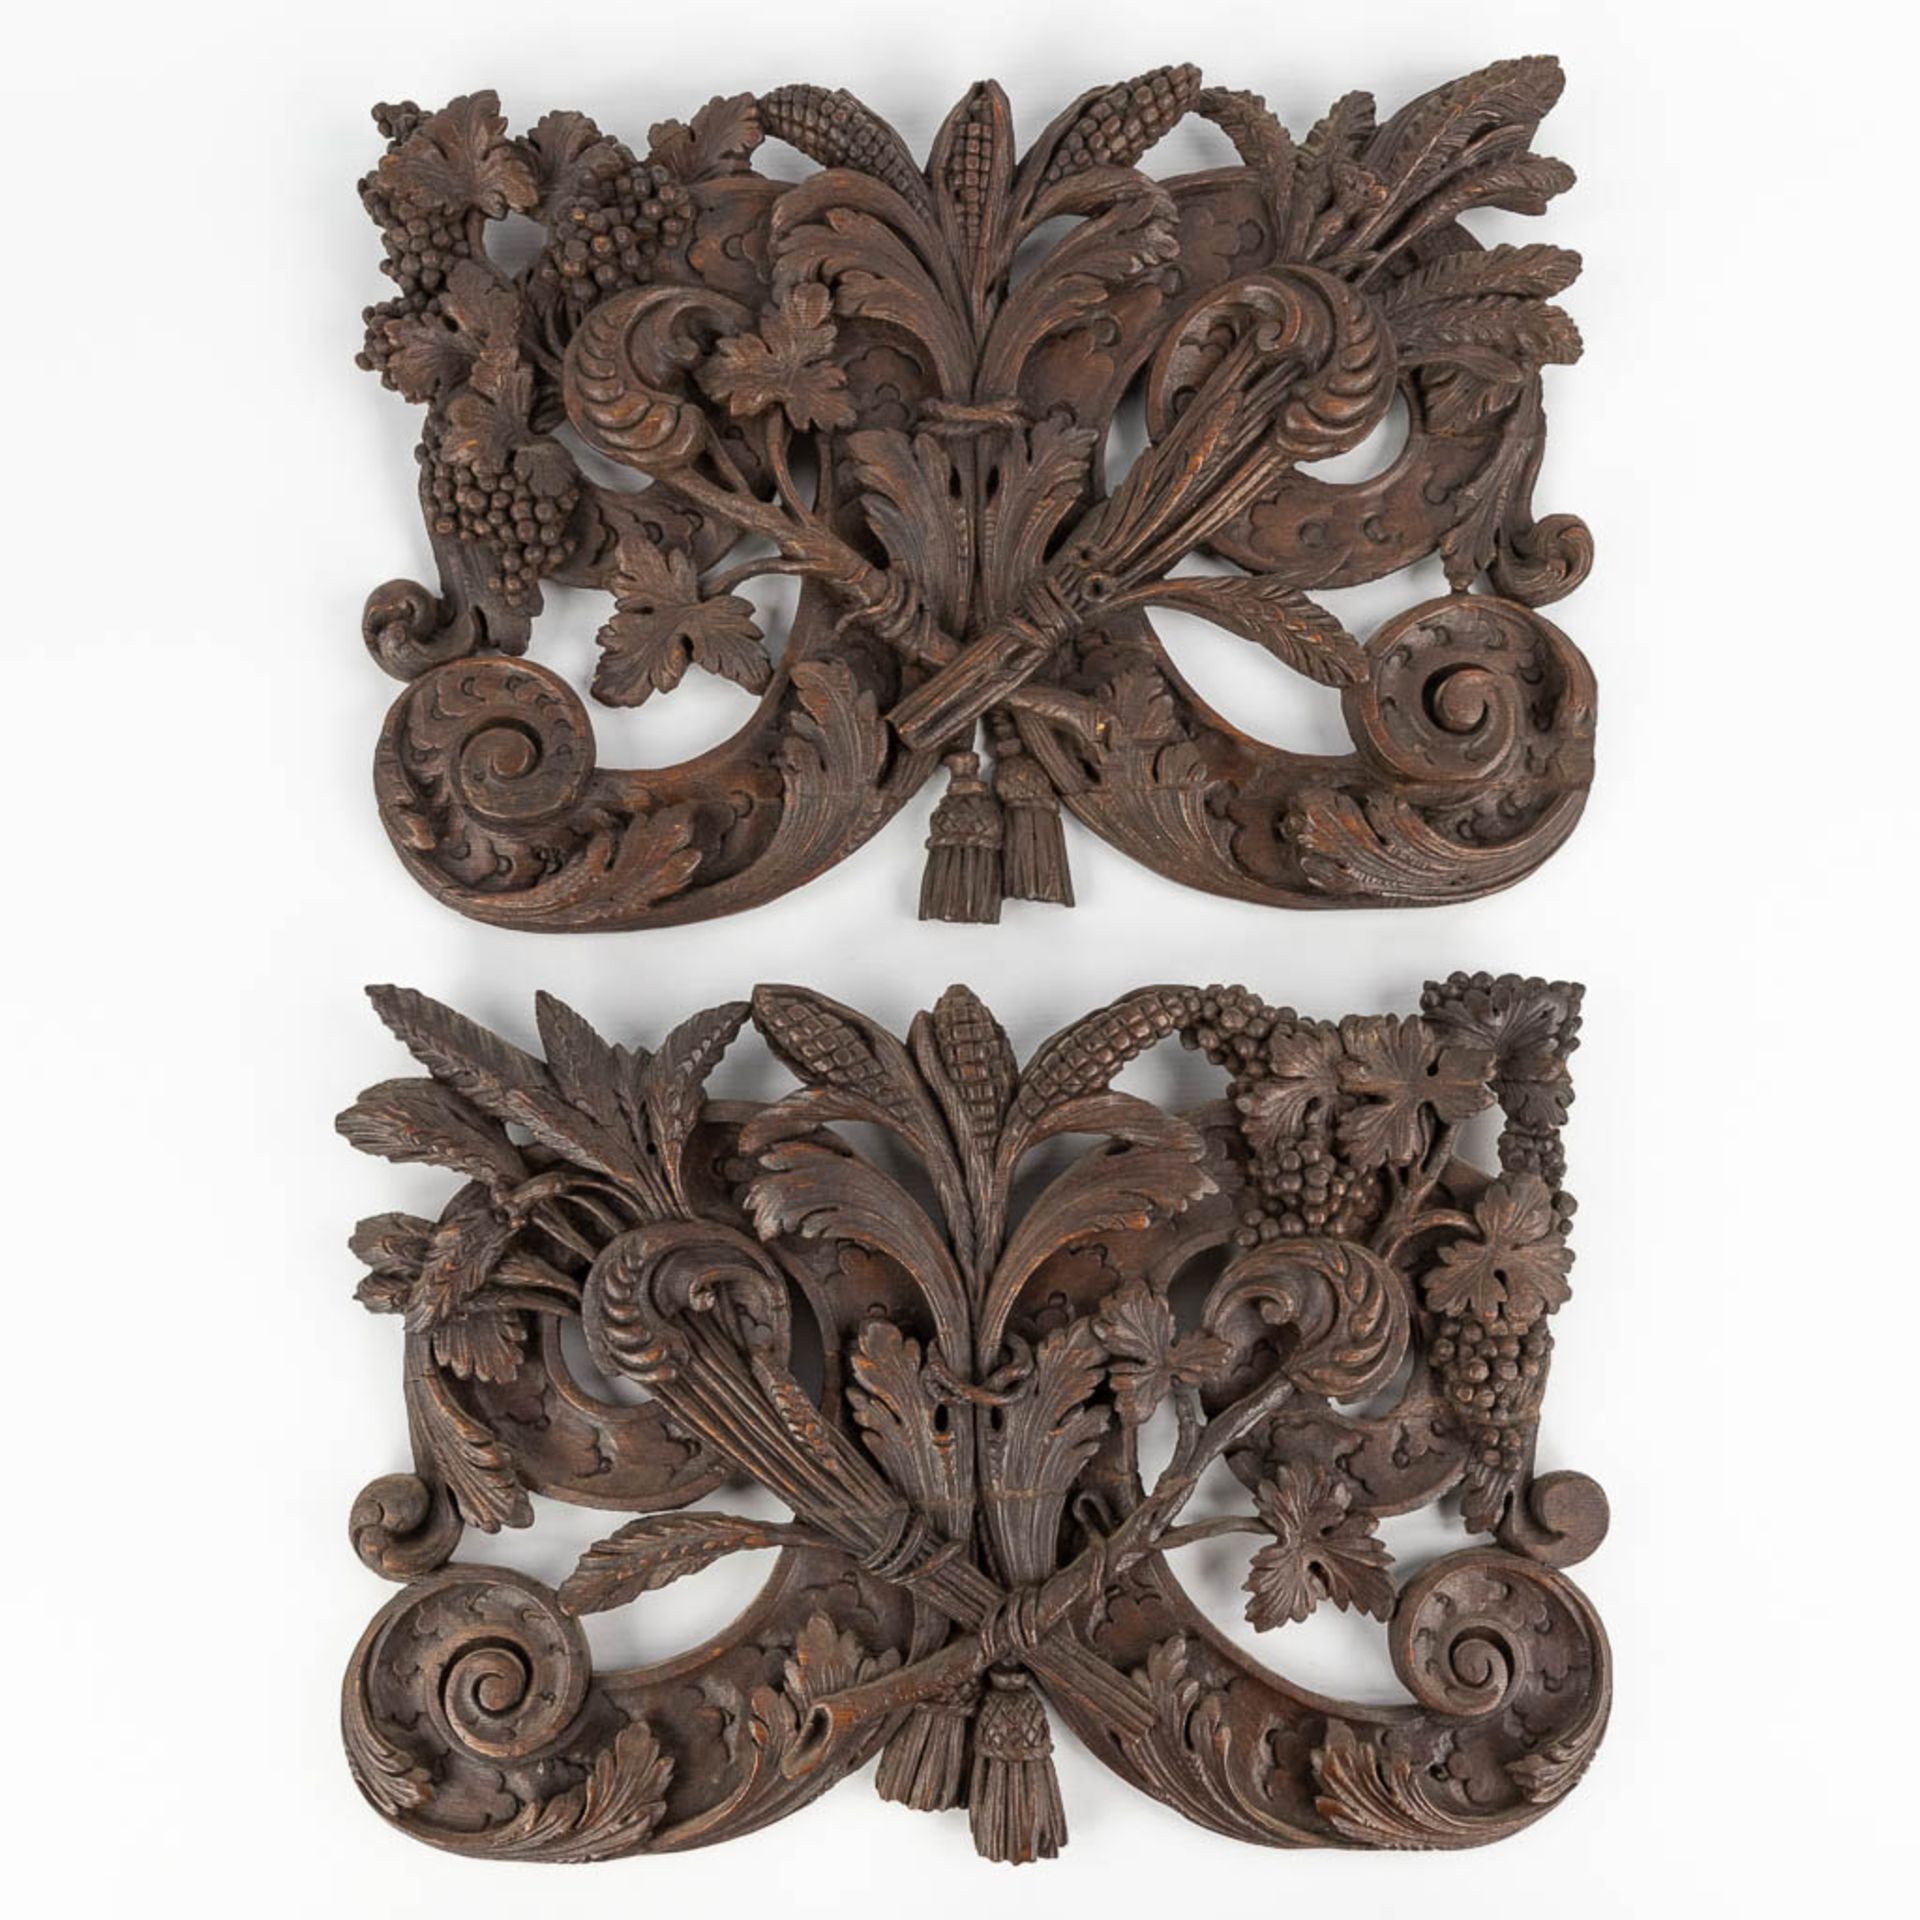 A pair of wood-sculptured panels, decorated with grapes, corn and wheat. 18th C. (W:51 x H:35 cm)